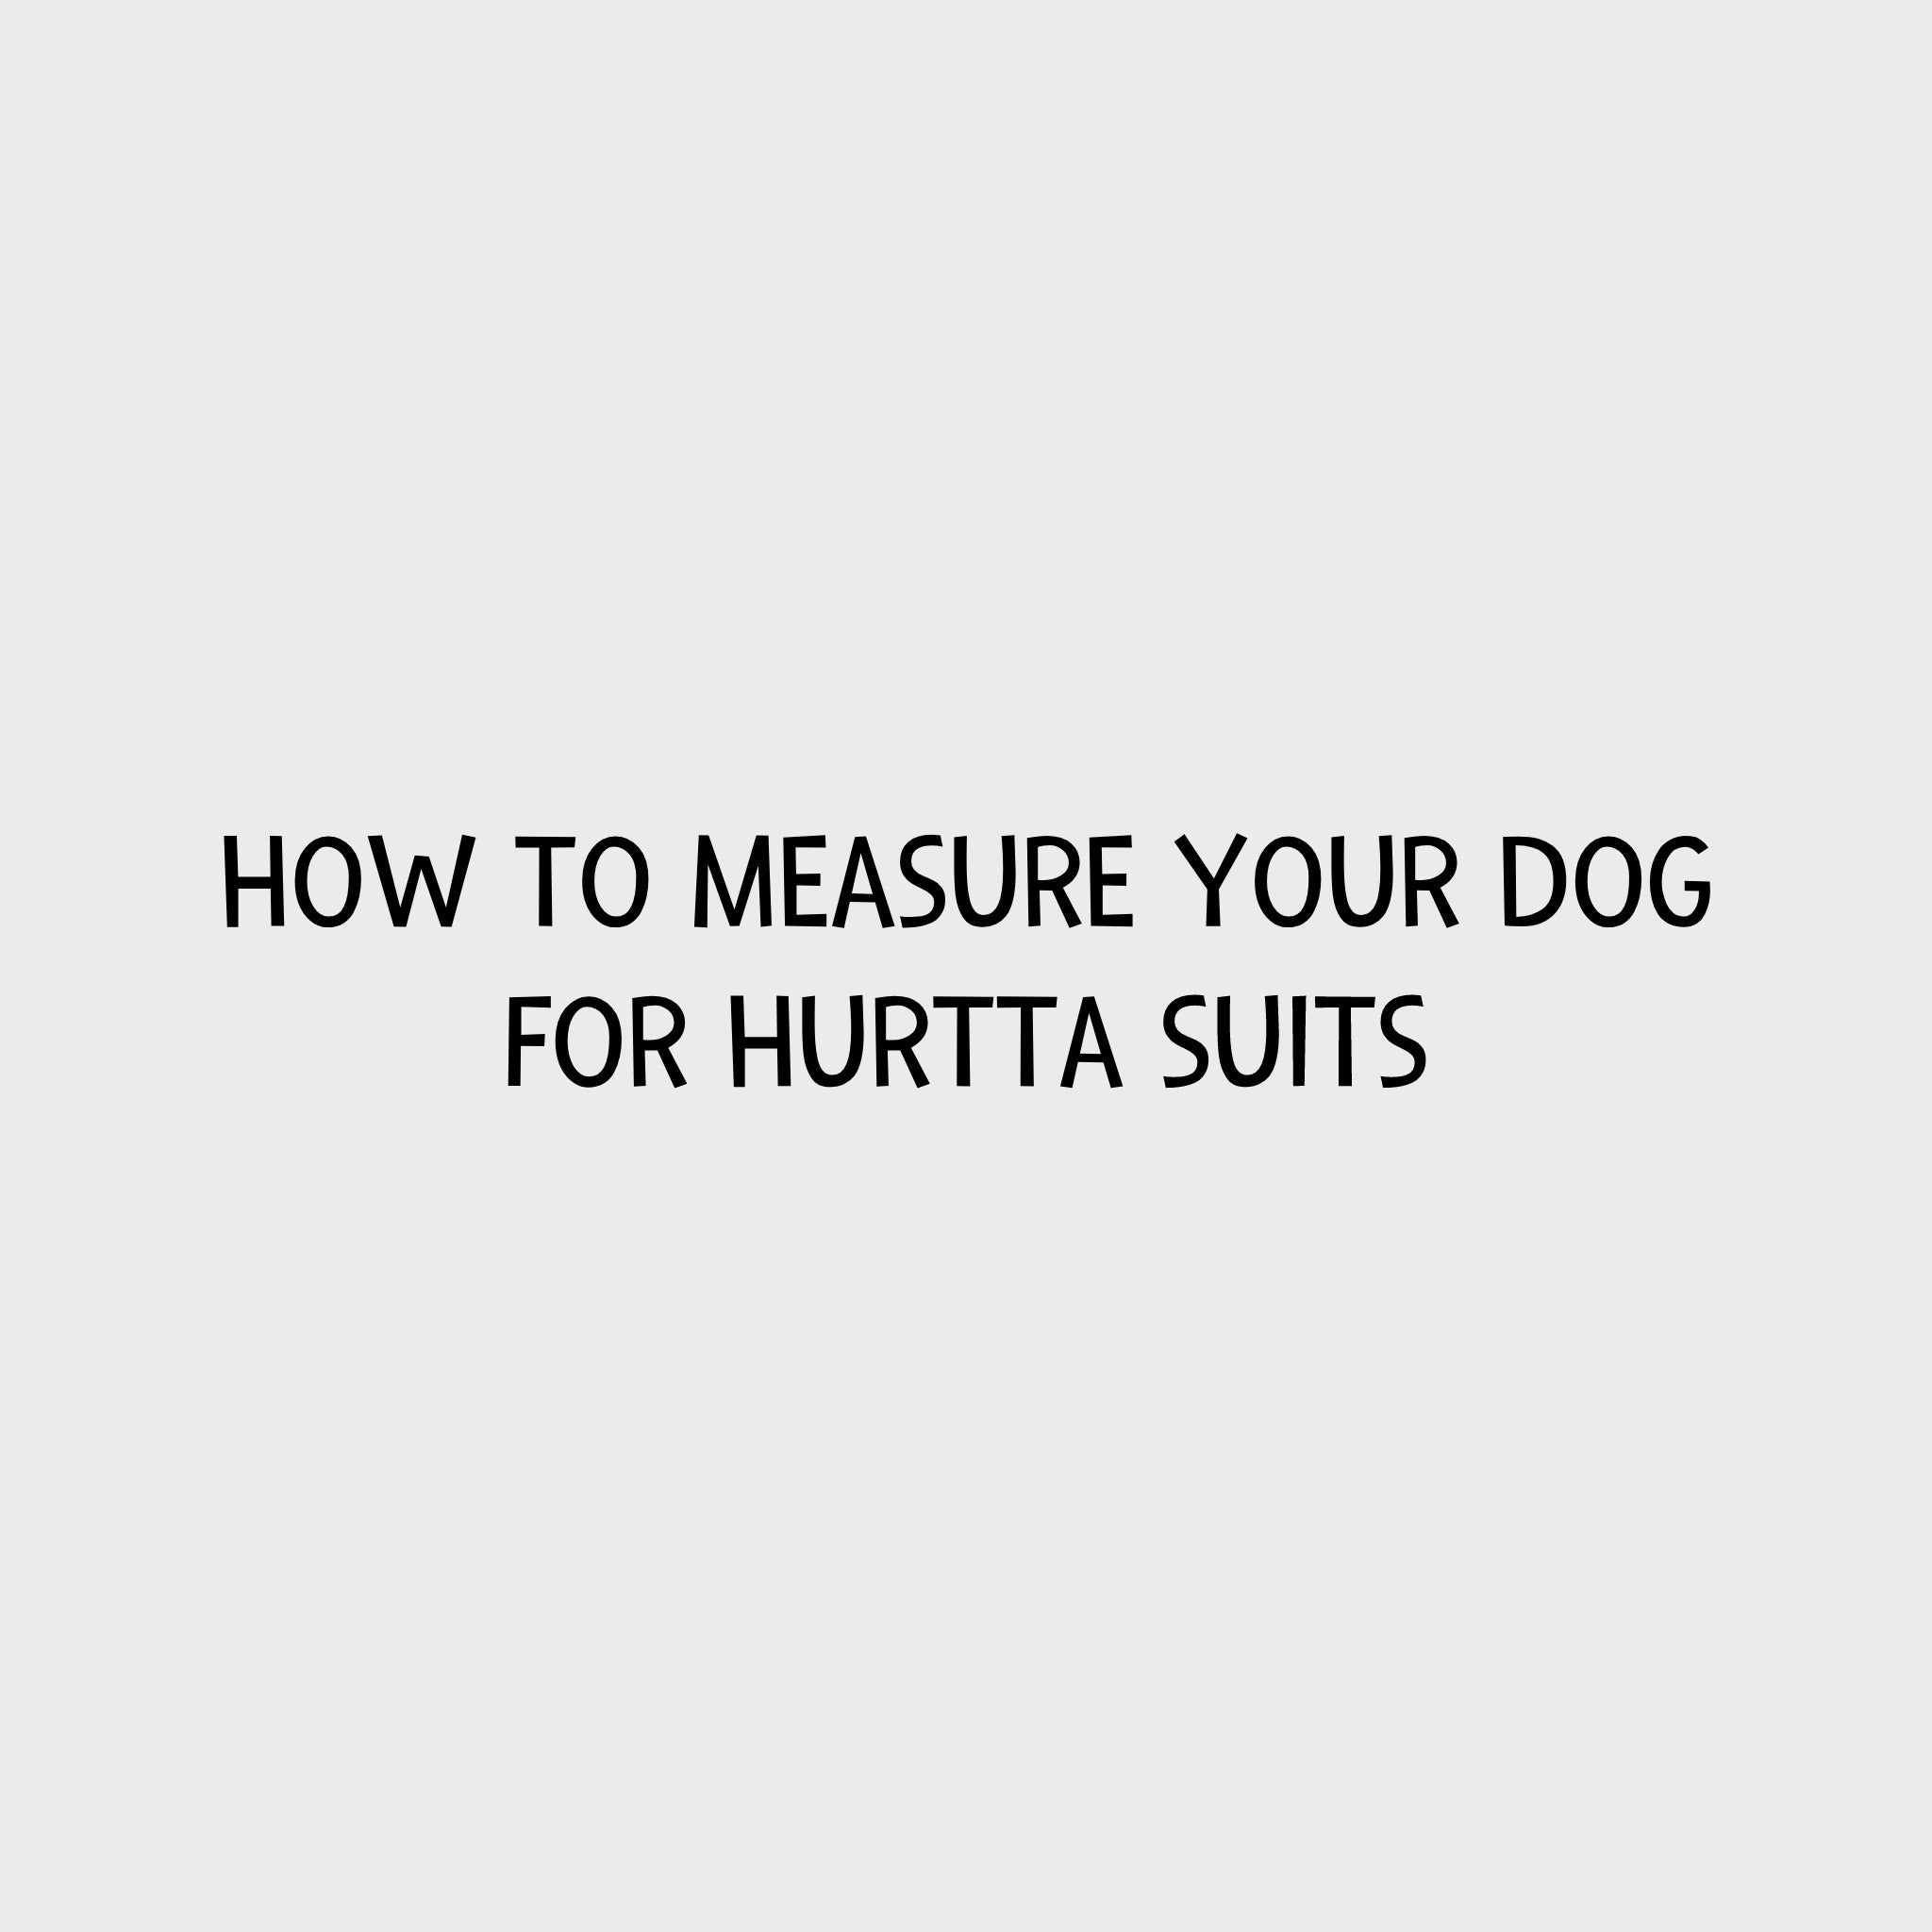 Video - How to measure your dog for Hurtta suits